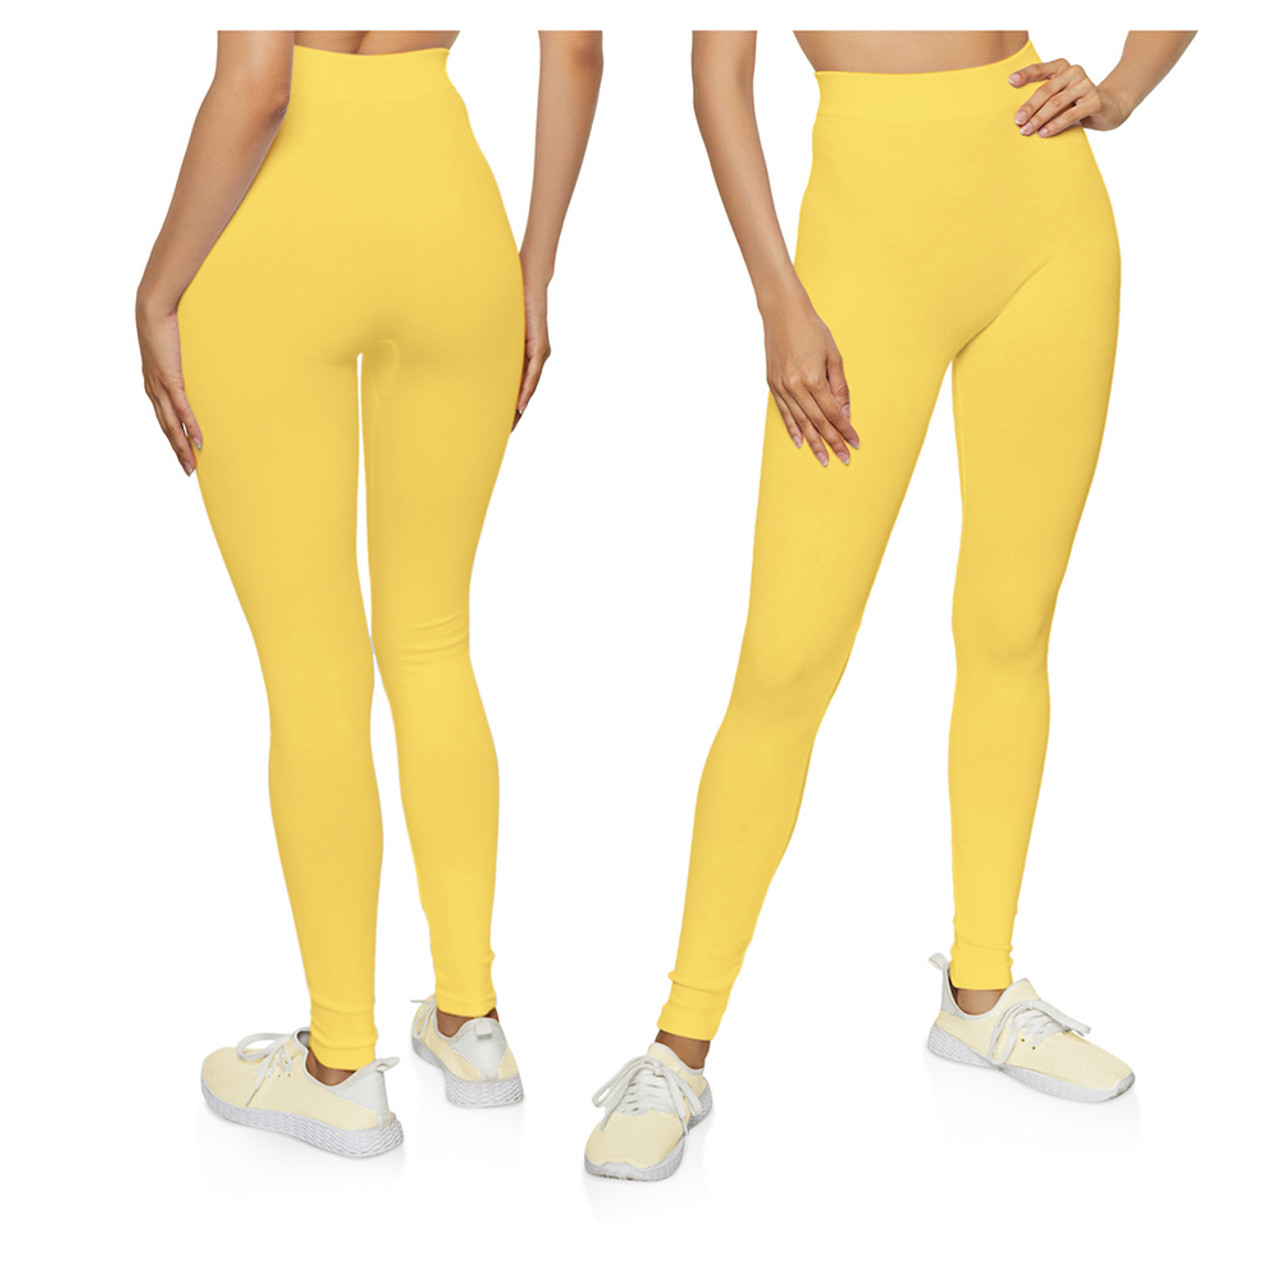 Women's High Waisted Tummy Control Seamless Leggings (2-Pack) - DailySteals